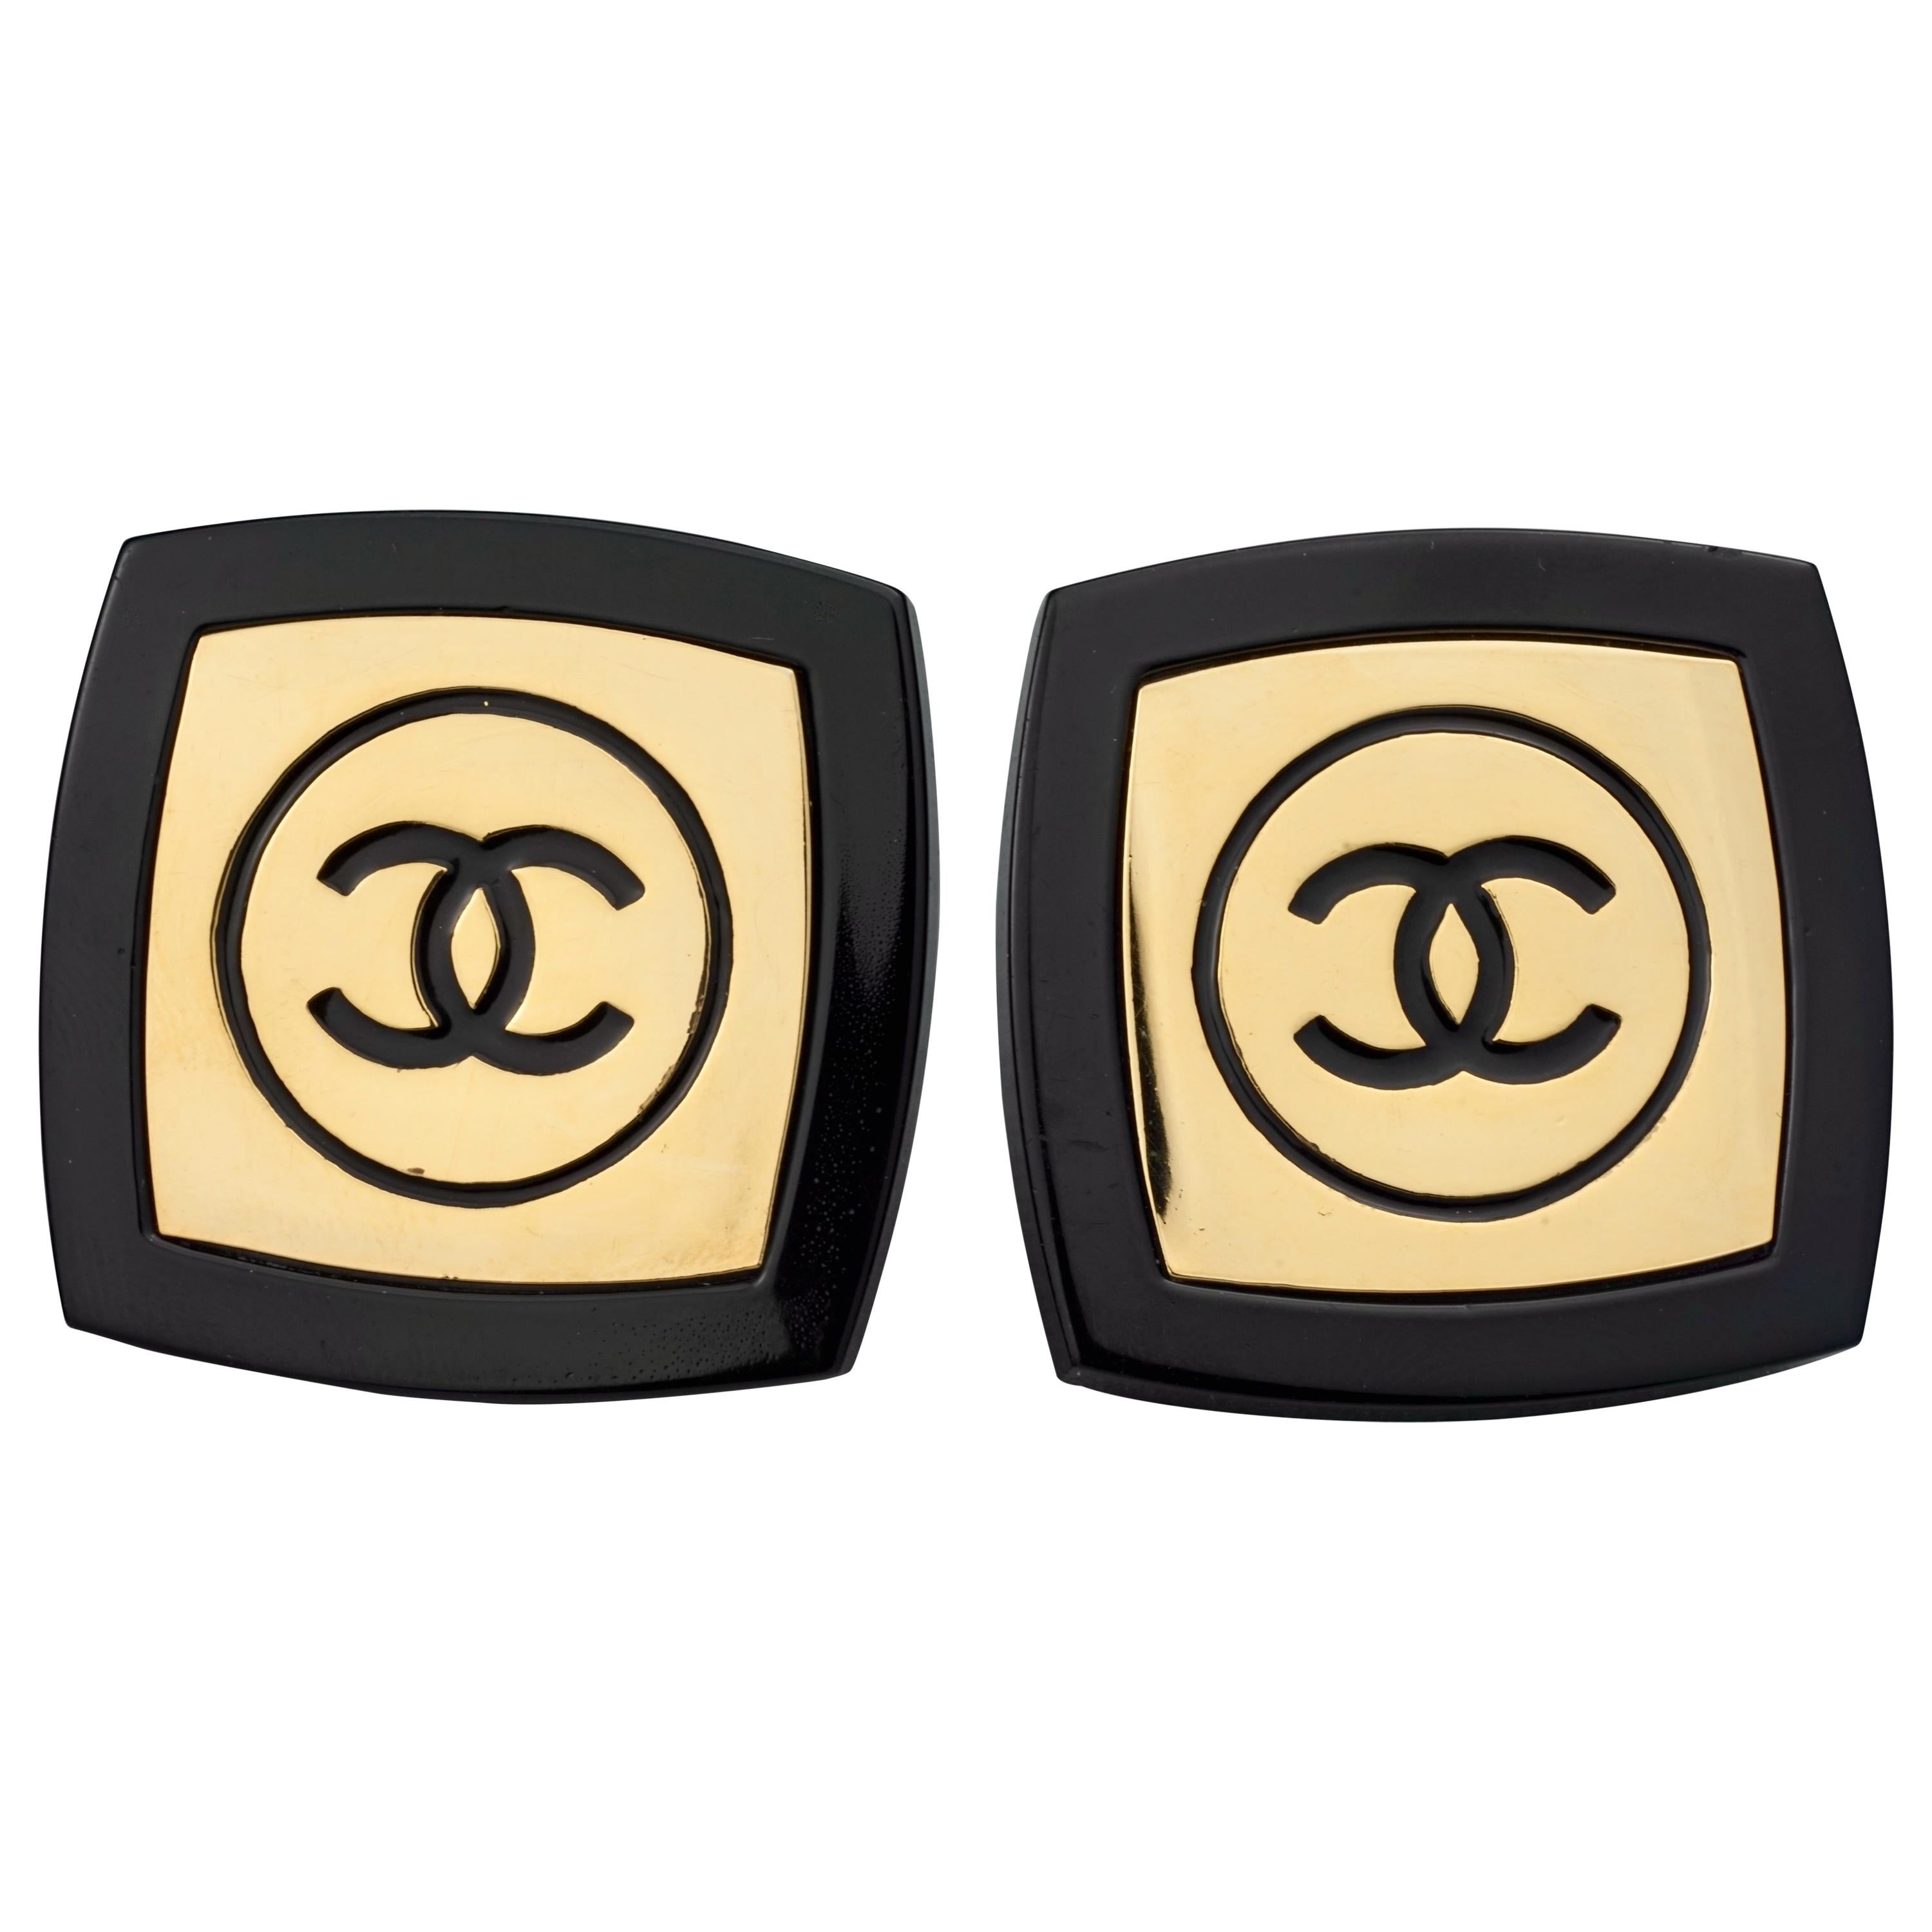 Chanel Makeup  Chanel compact mirror, Chanel cosmetics, Chanel makeup